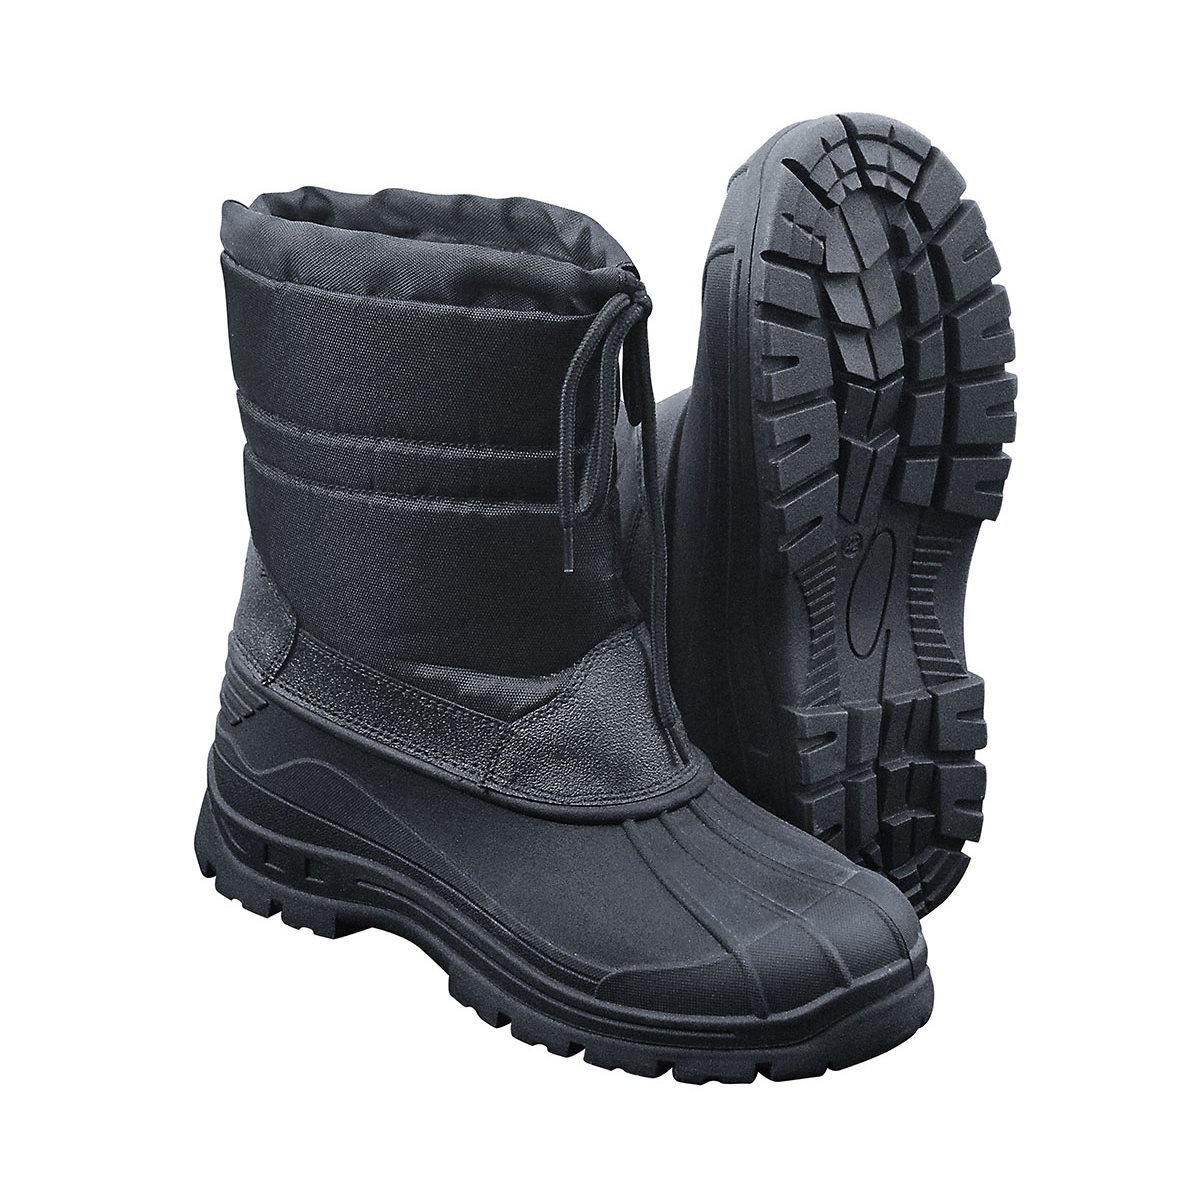 Winter Boots with Fur BLACK  887 L-11